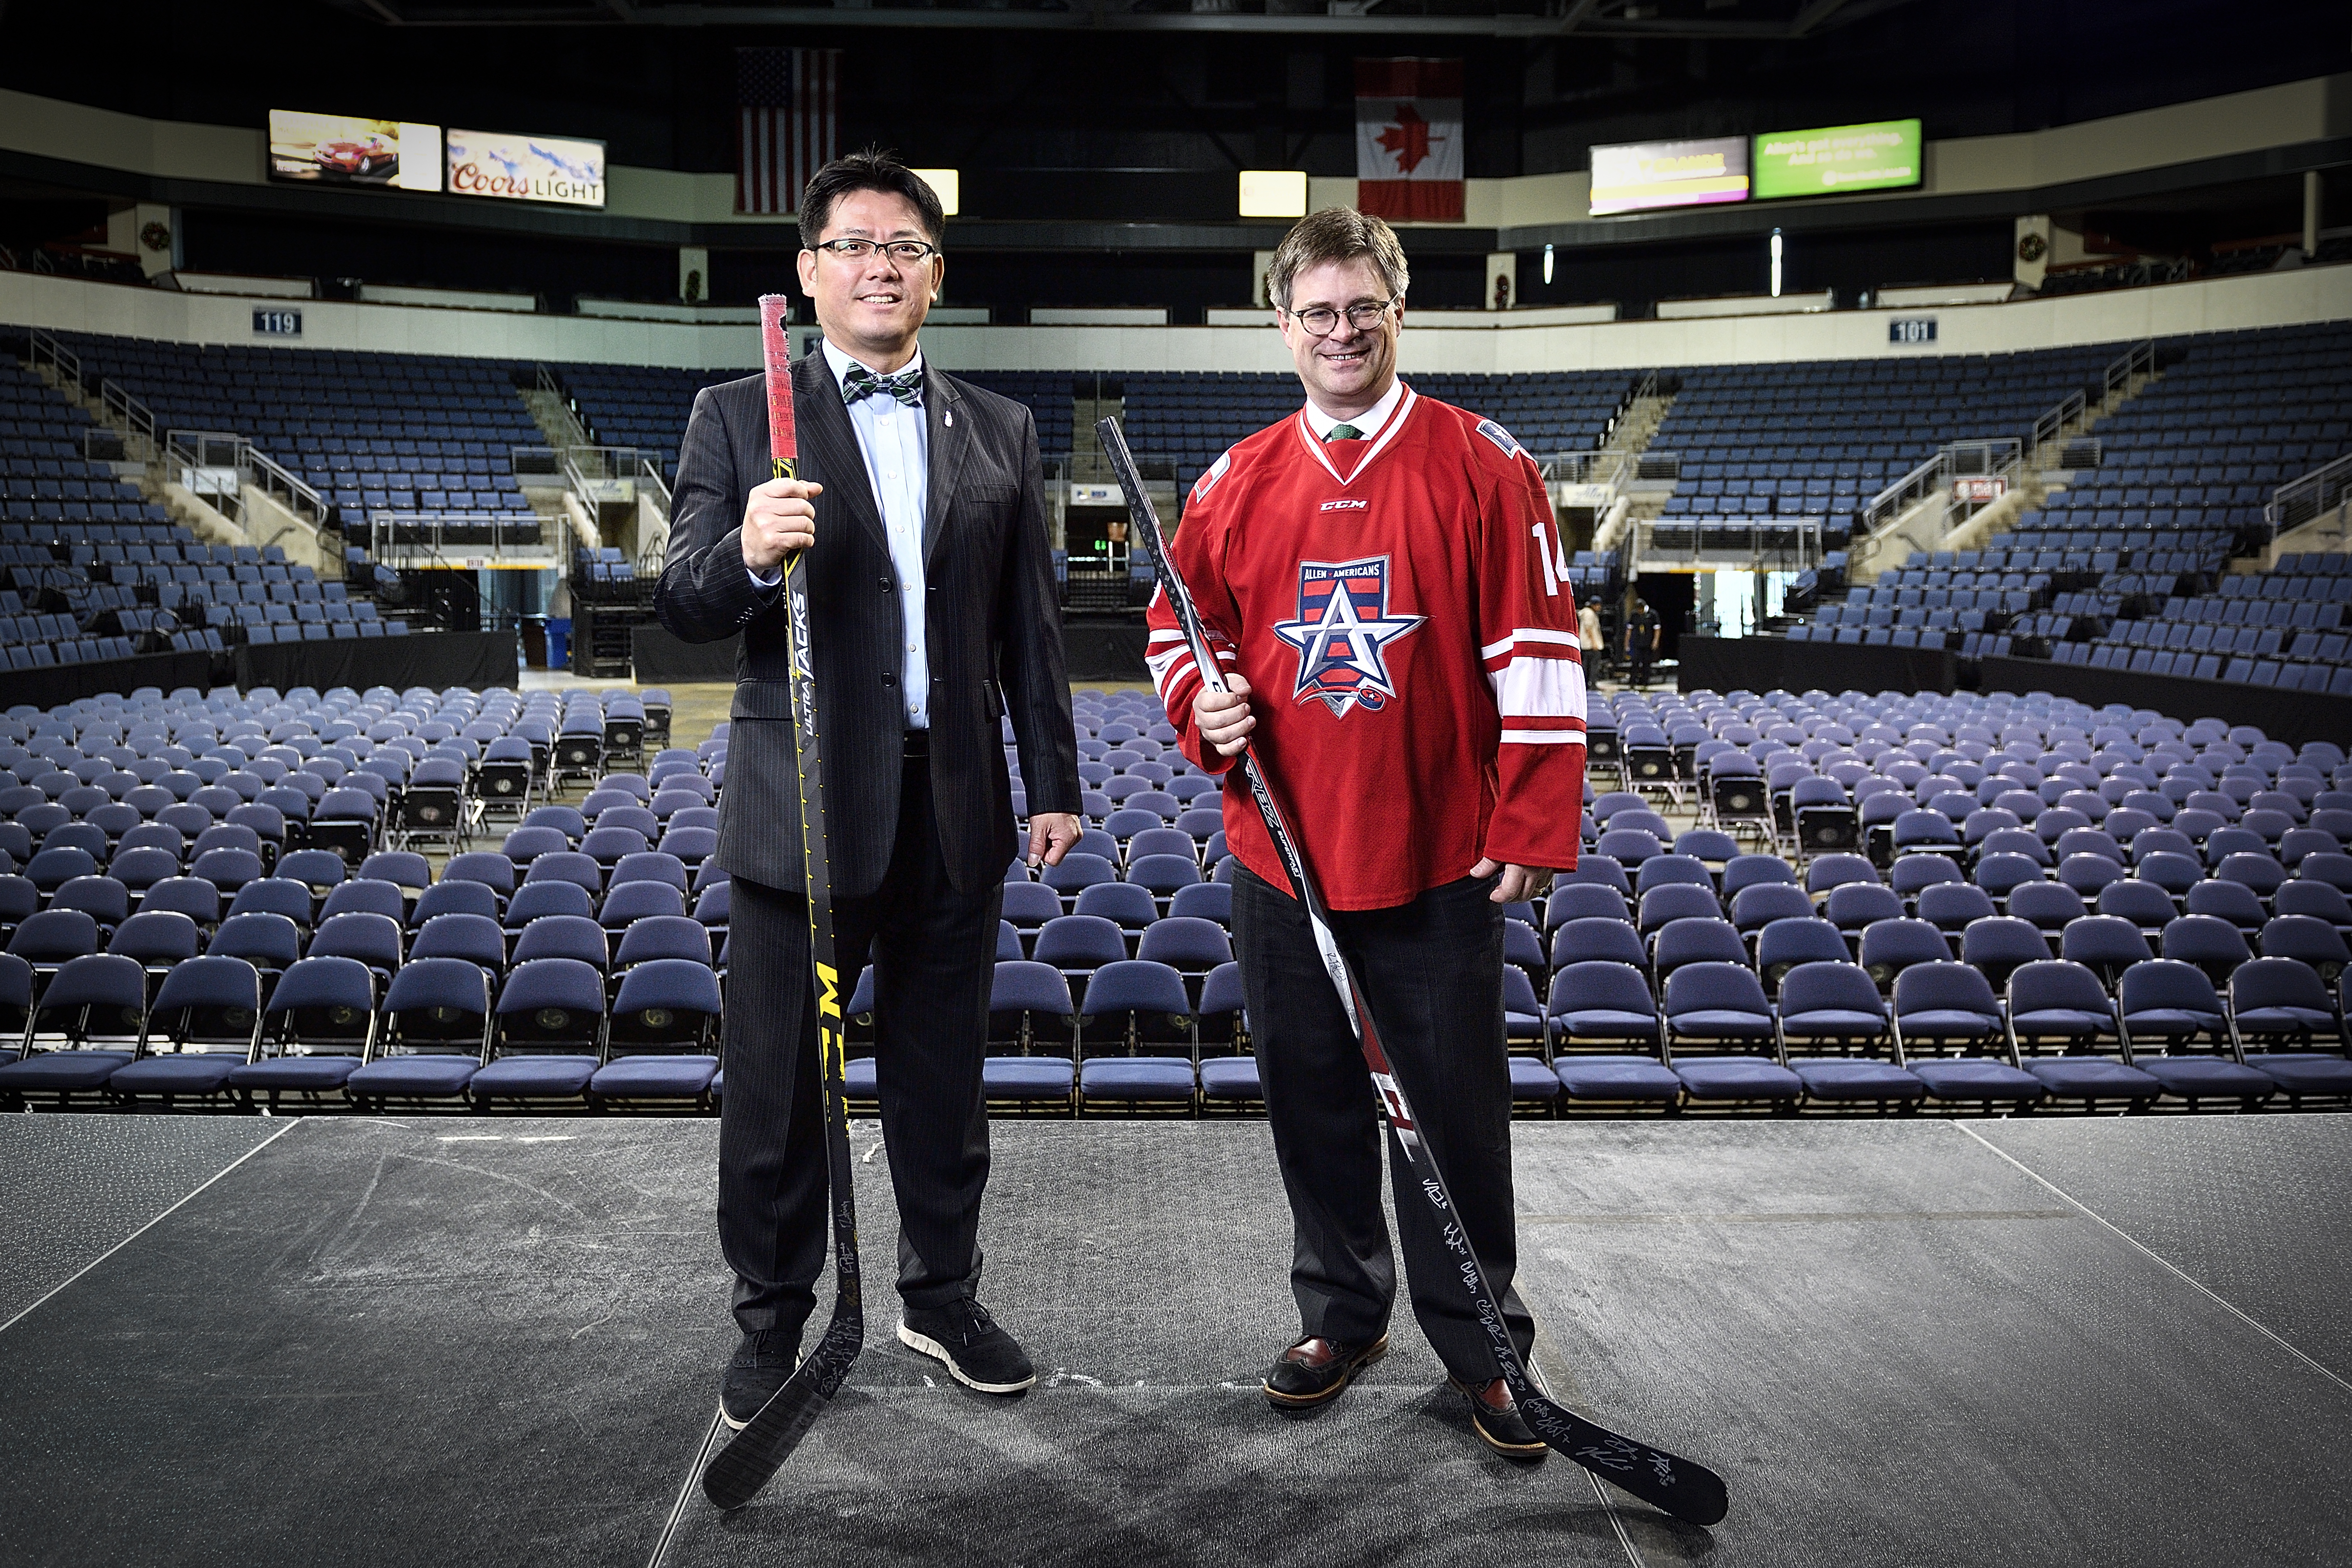 Young Hoon Kim and John Nauright photographed at the Allen Event Center. Venues such as these, which can be used for multiple purposes including concerts and ice hockey games, offer a path to grow hockey into an international powerhouse sport. 